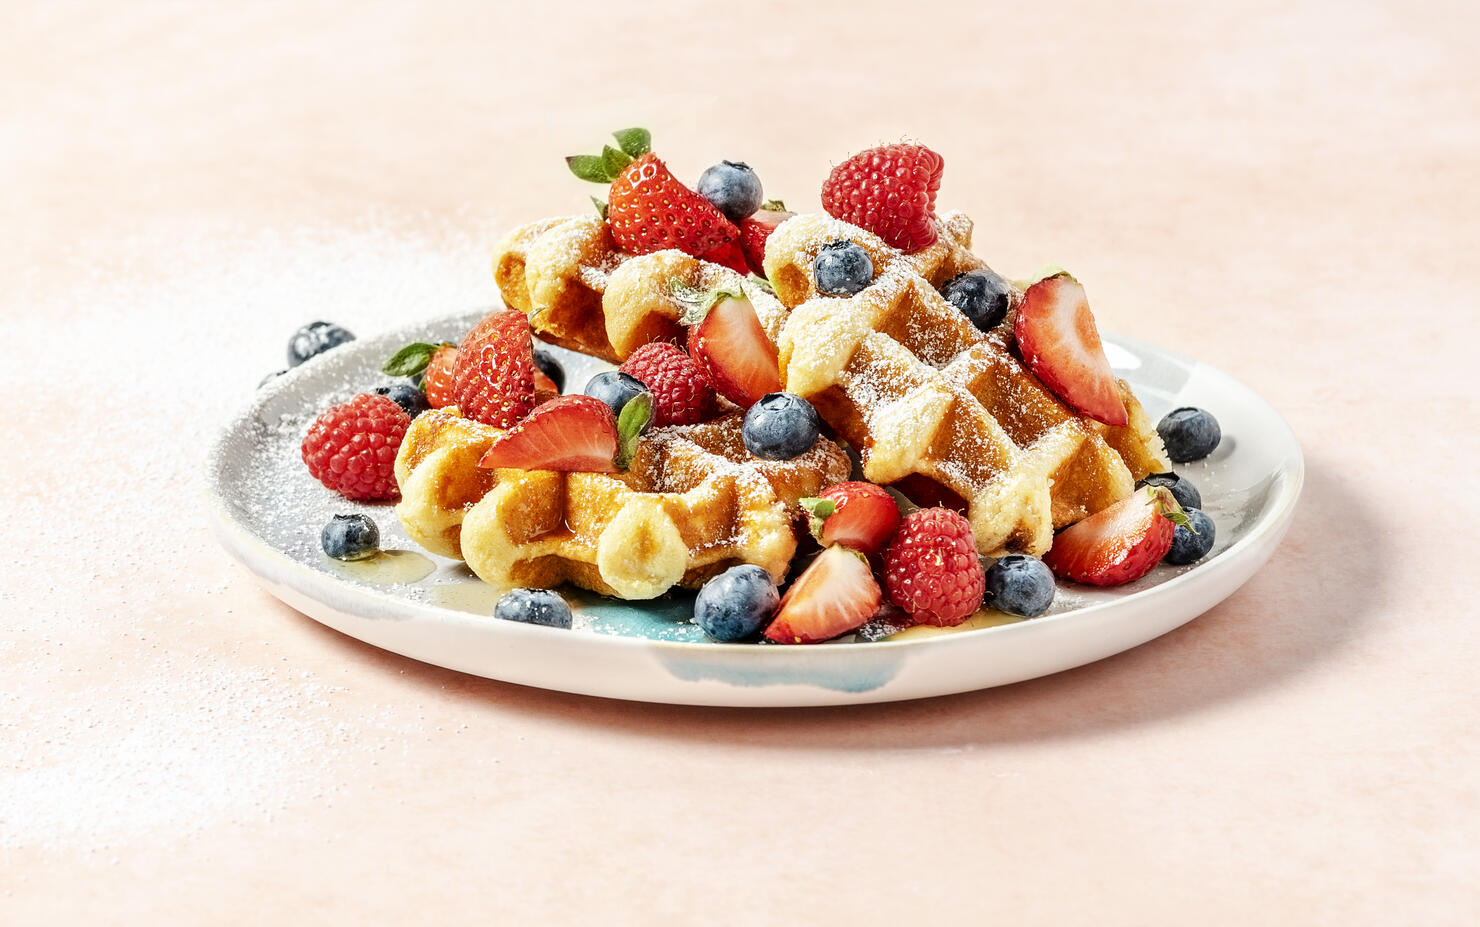 A plate of waffles with berries on peach background